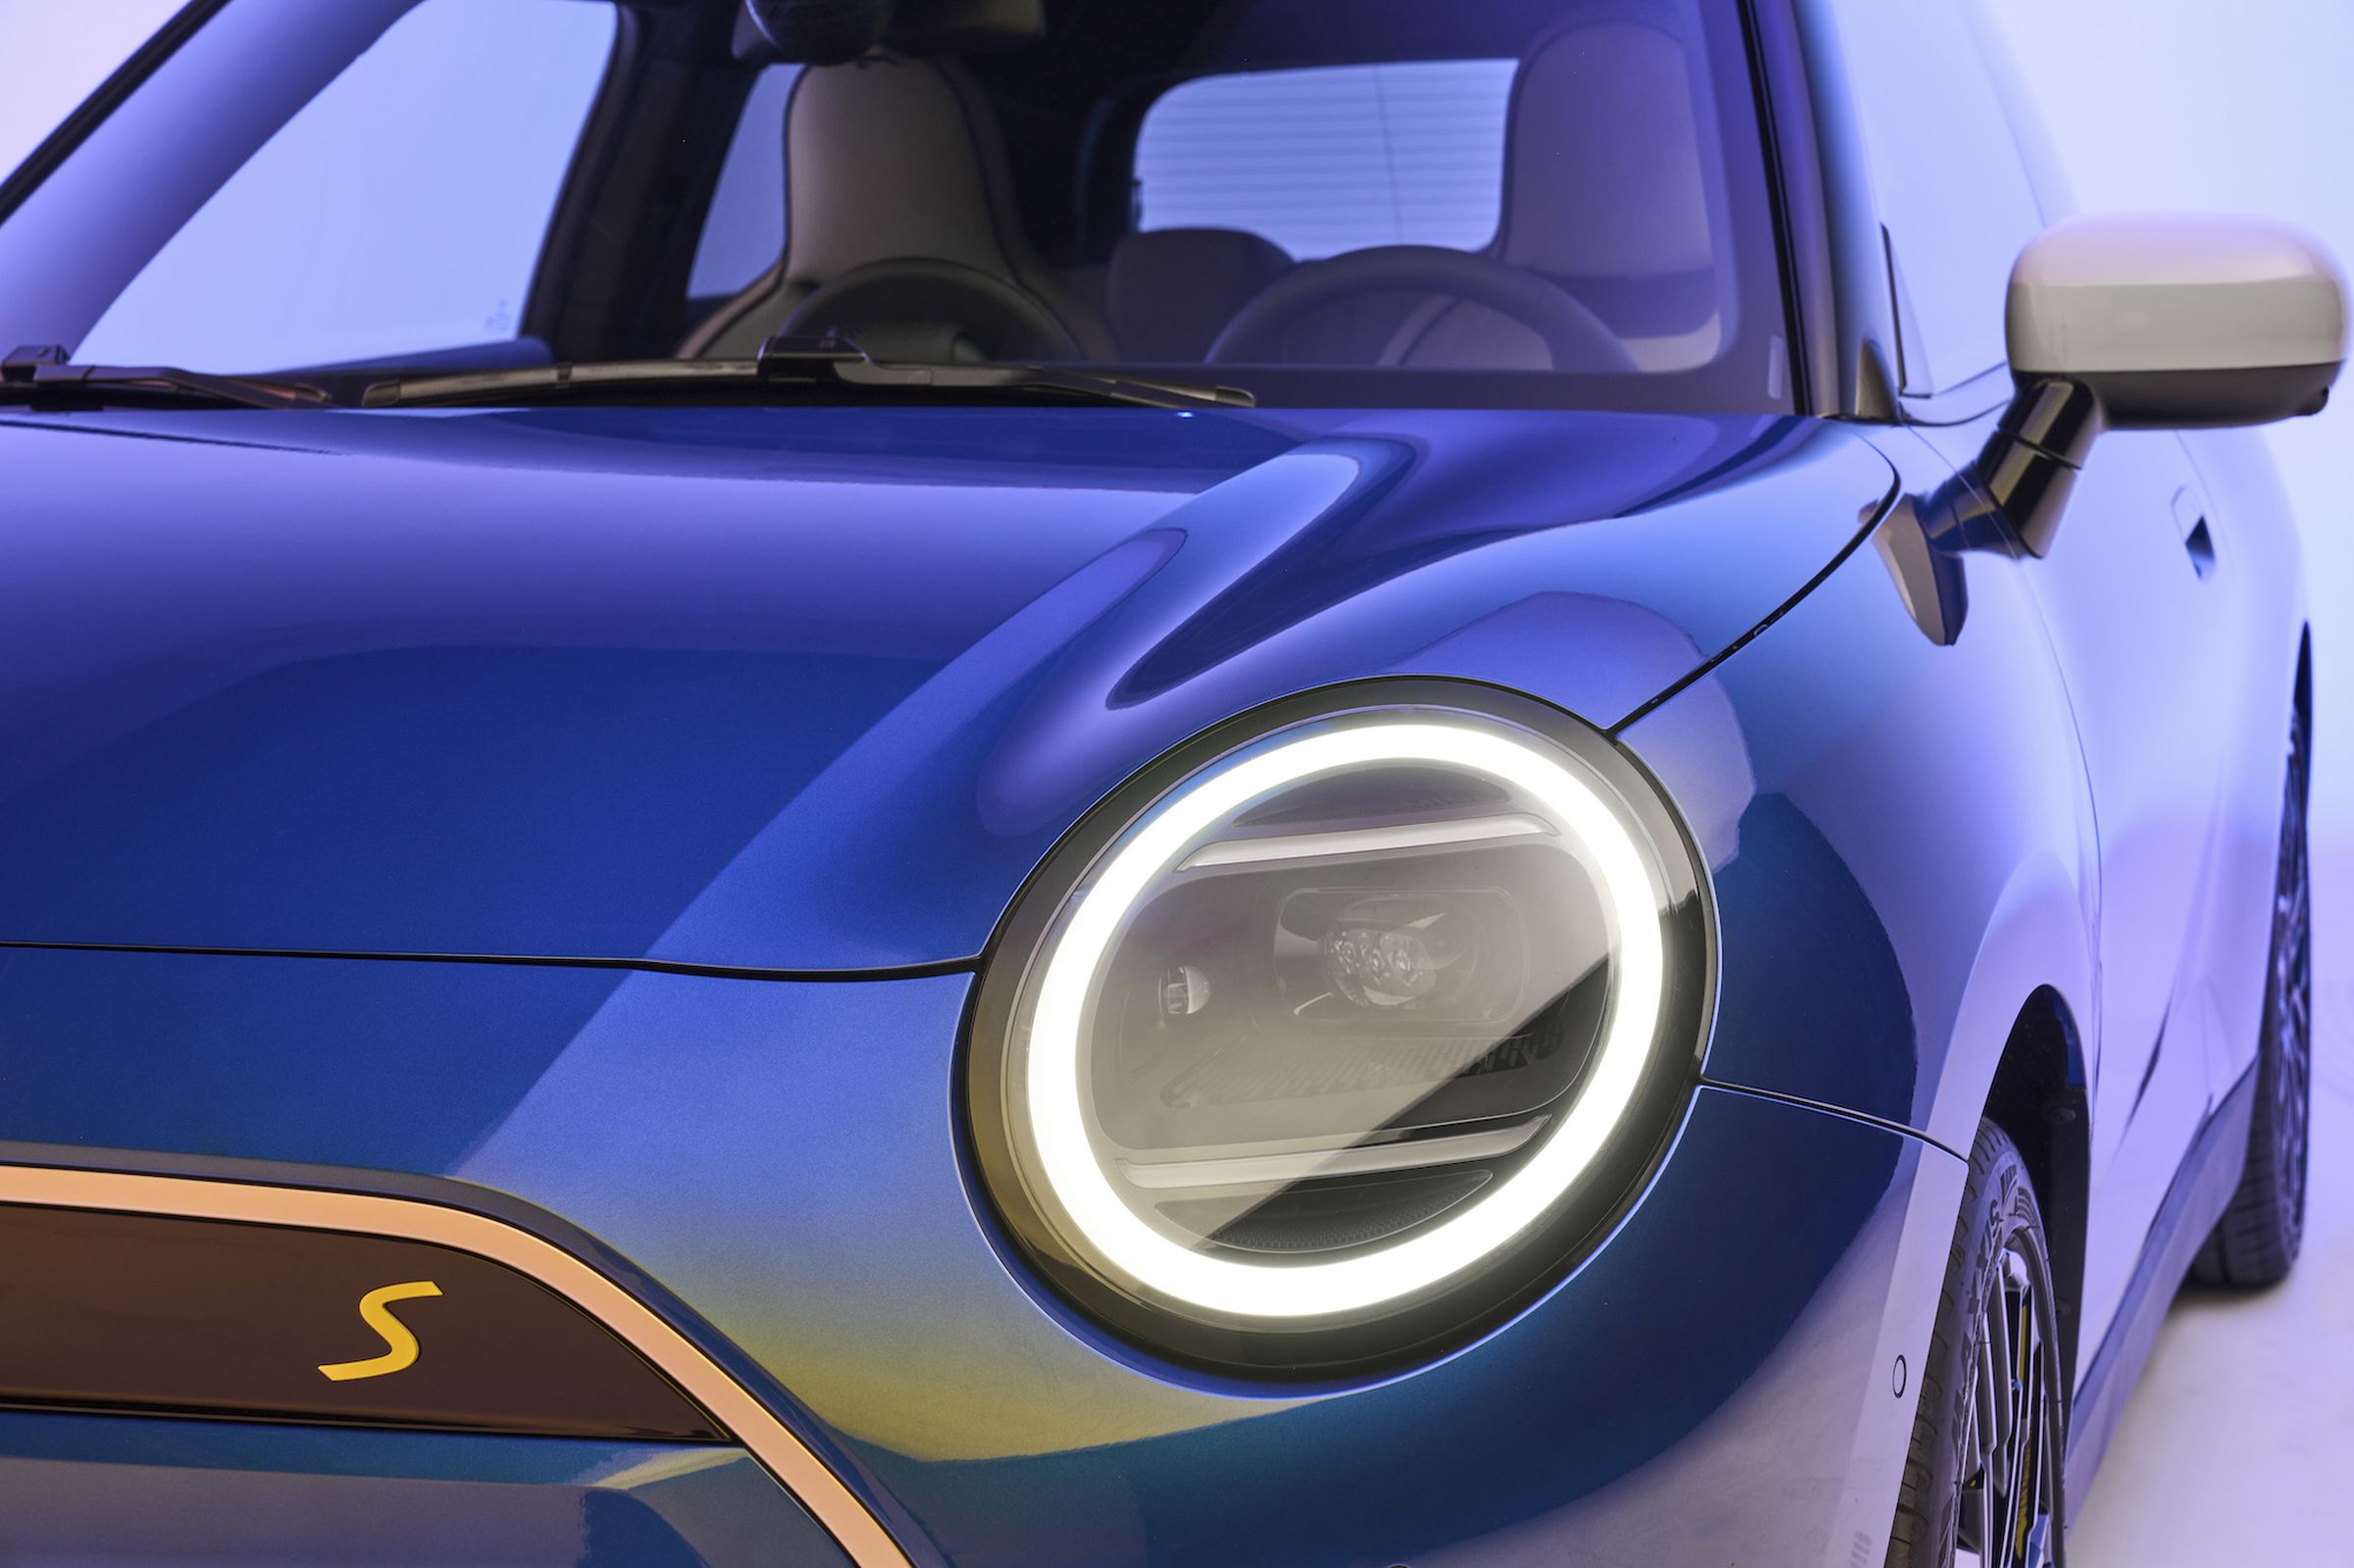 Close-up of the driver’s side corner of a blue Mini Cooper EV, showing the bright ring around the headlight.